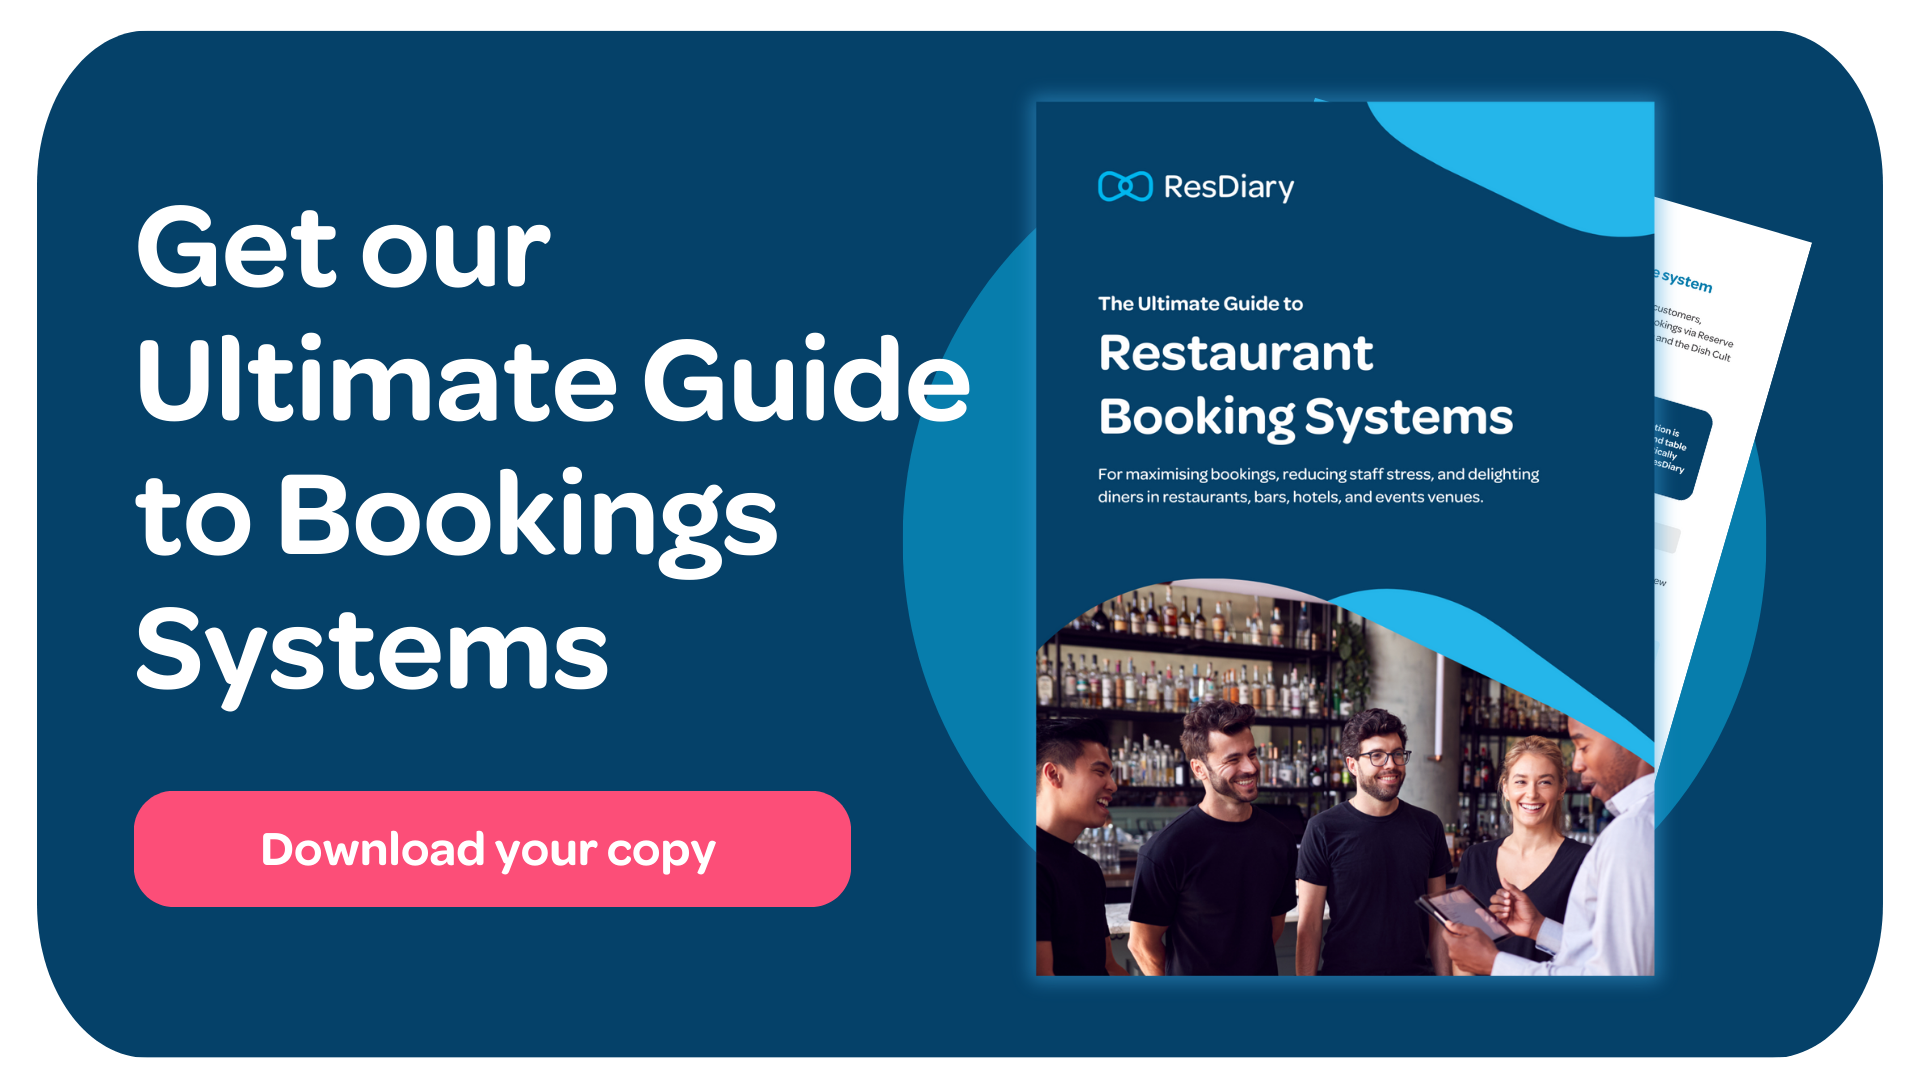 Download the Ultimate Guide to Restaurant Booking Systems from ResDiary